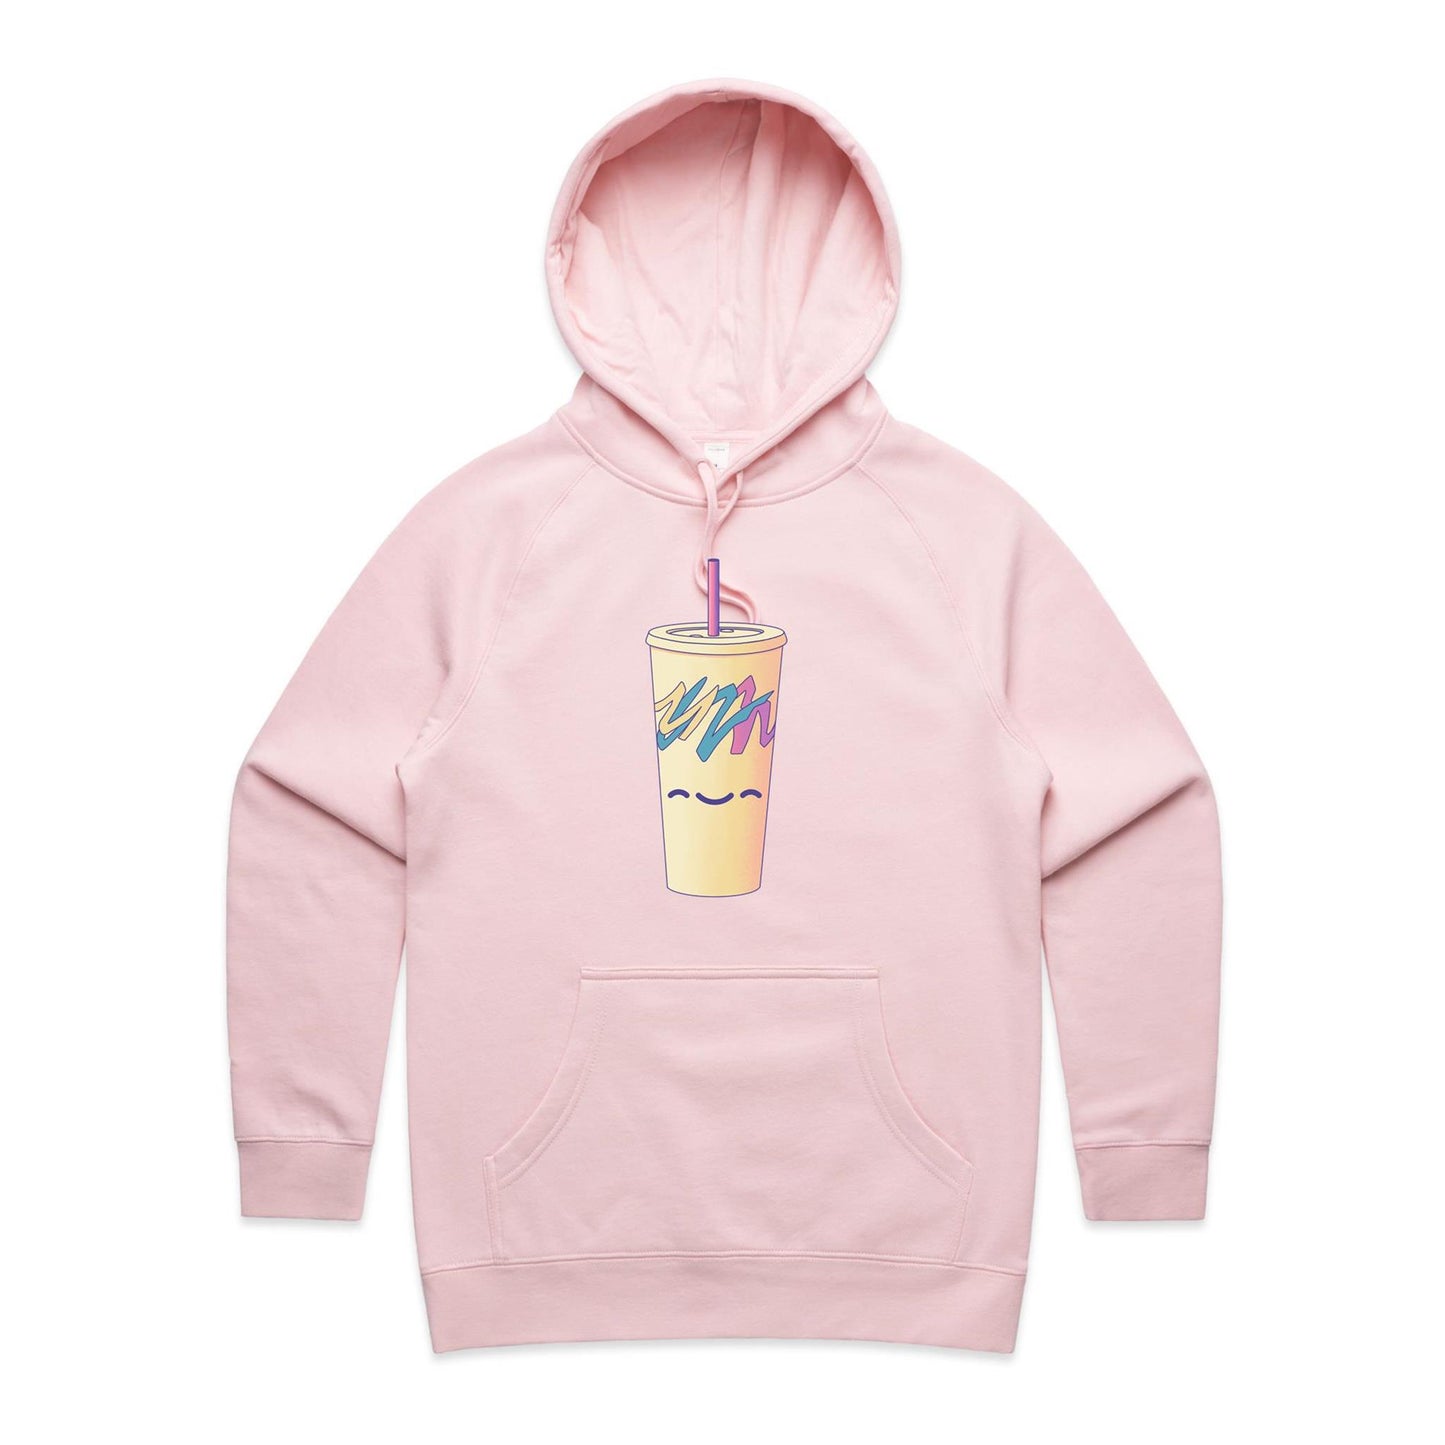 Running Cup That Hill - Women's Hoodie